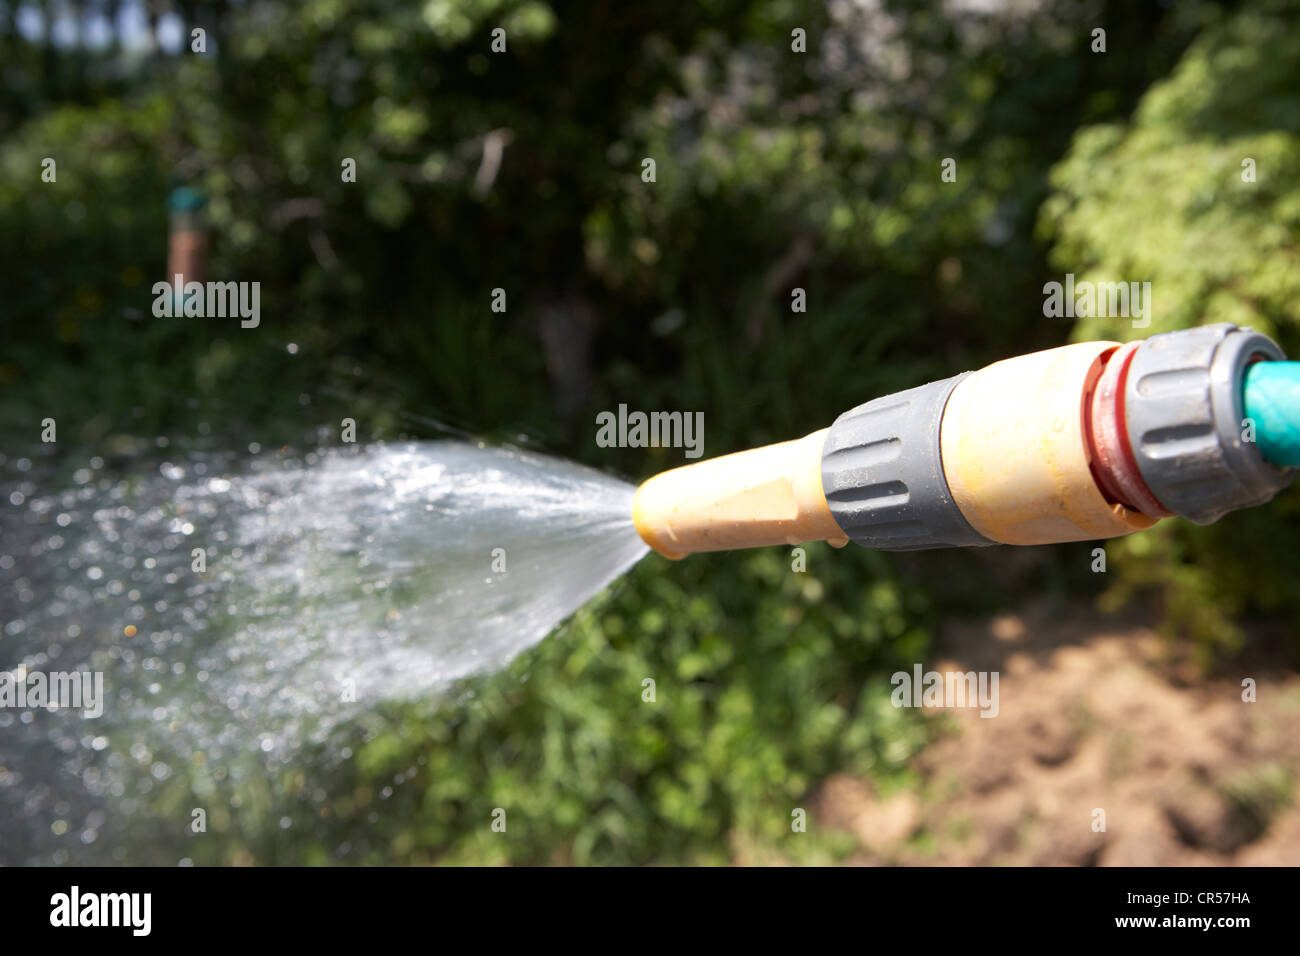 using a hose to water the garden on a sunny day in the uk Stock Photo